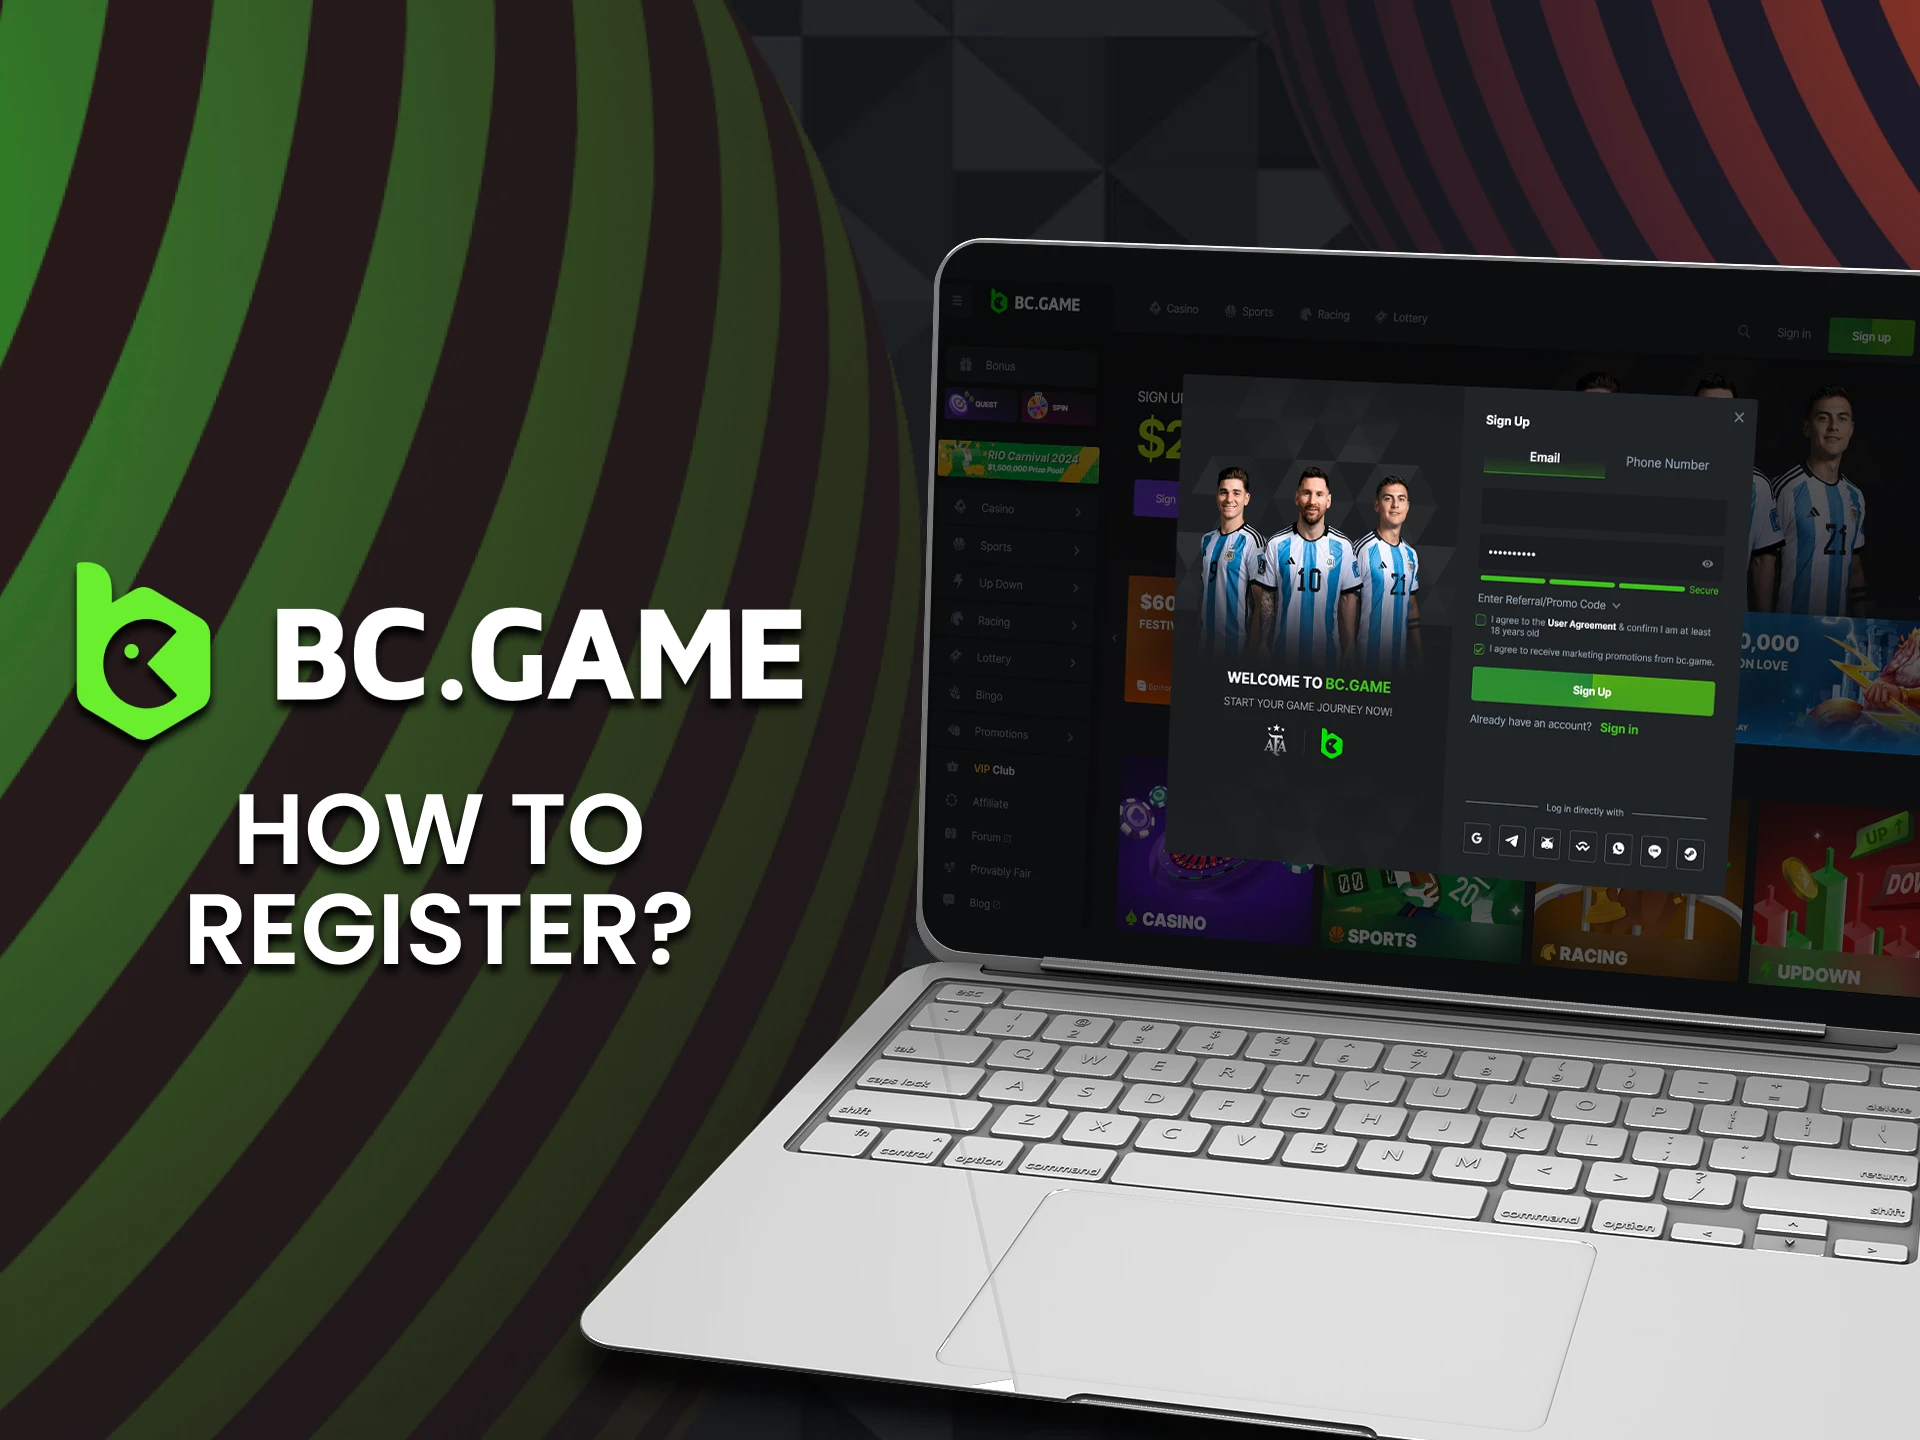 Press the button and enter your personal information to register at the BC Game.